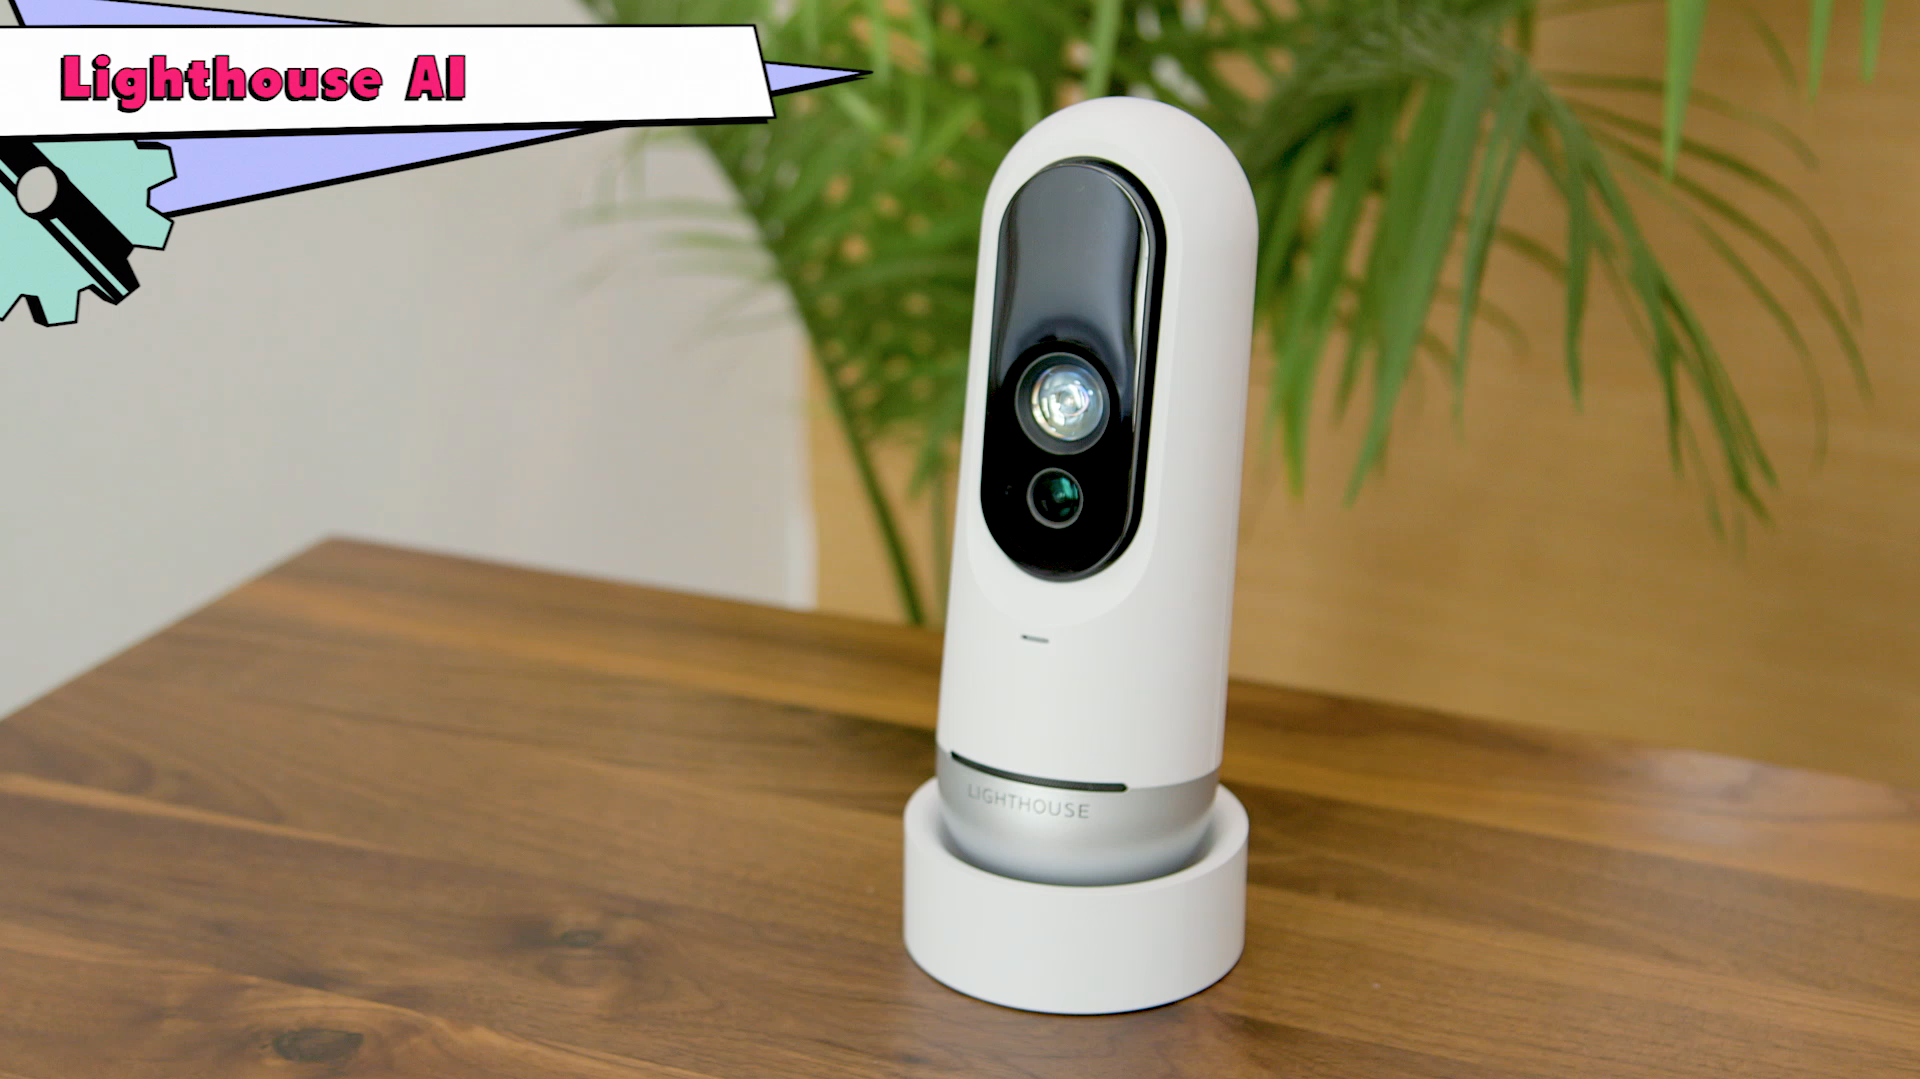 The Best Security Camera For Most People